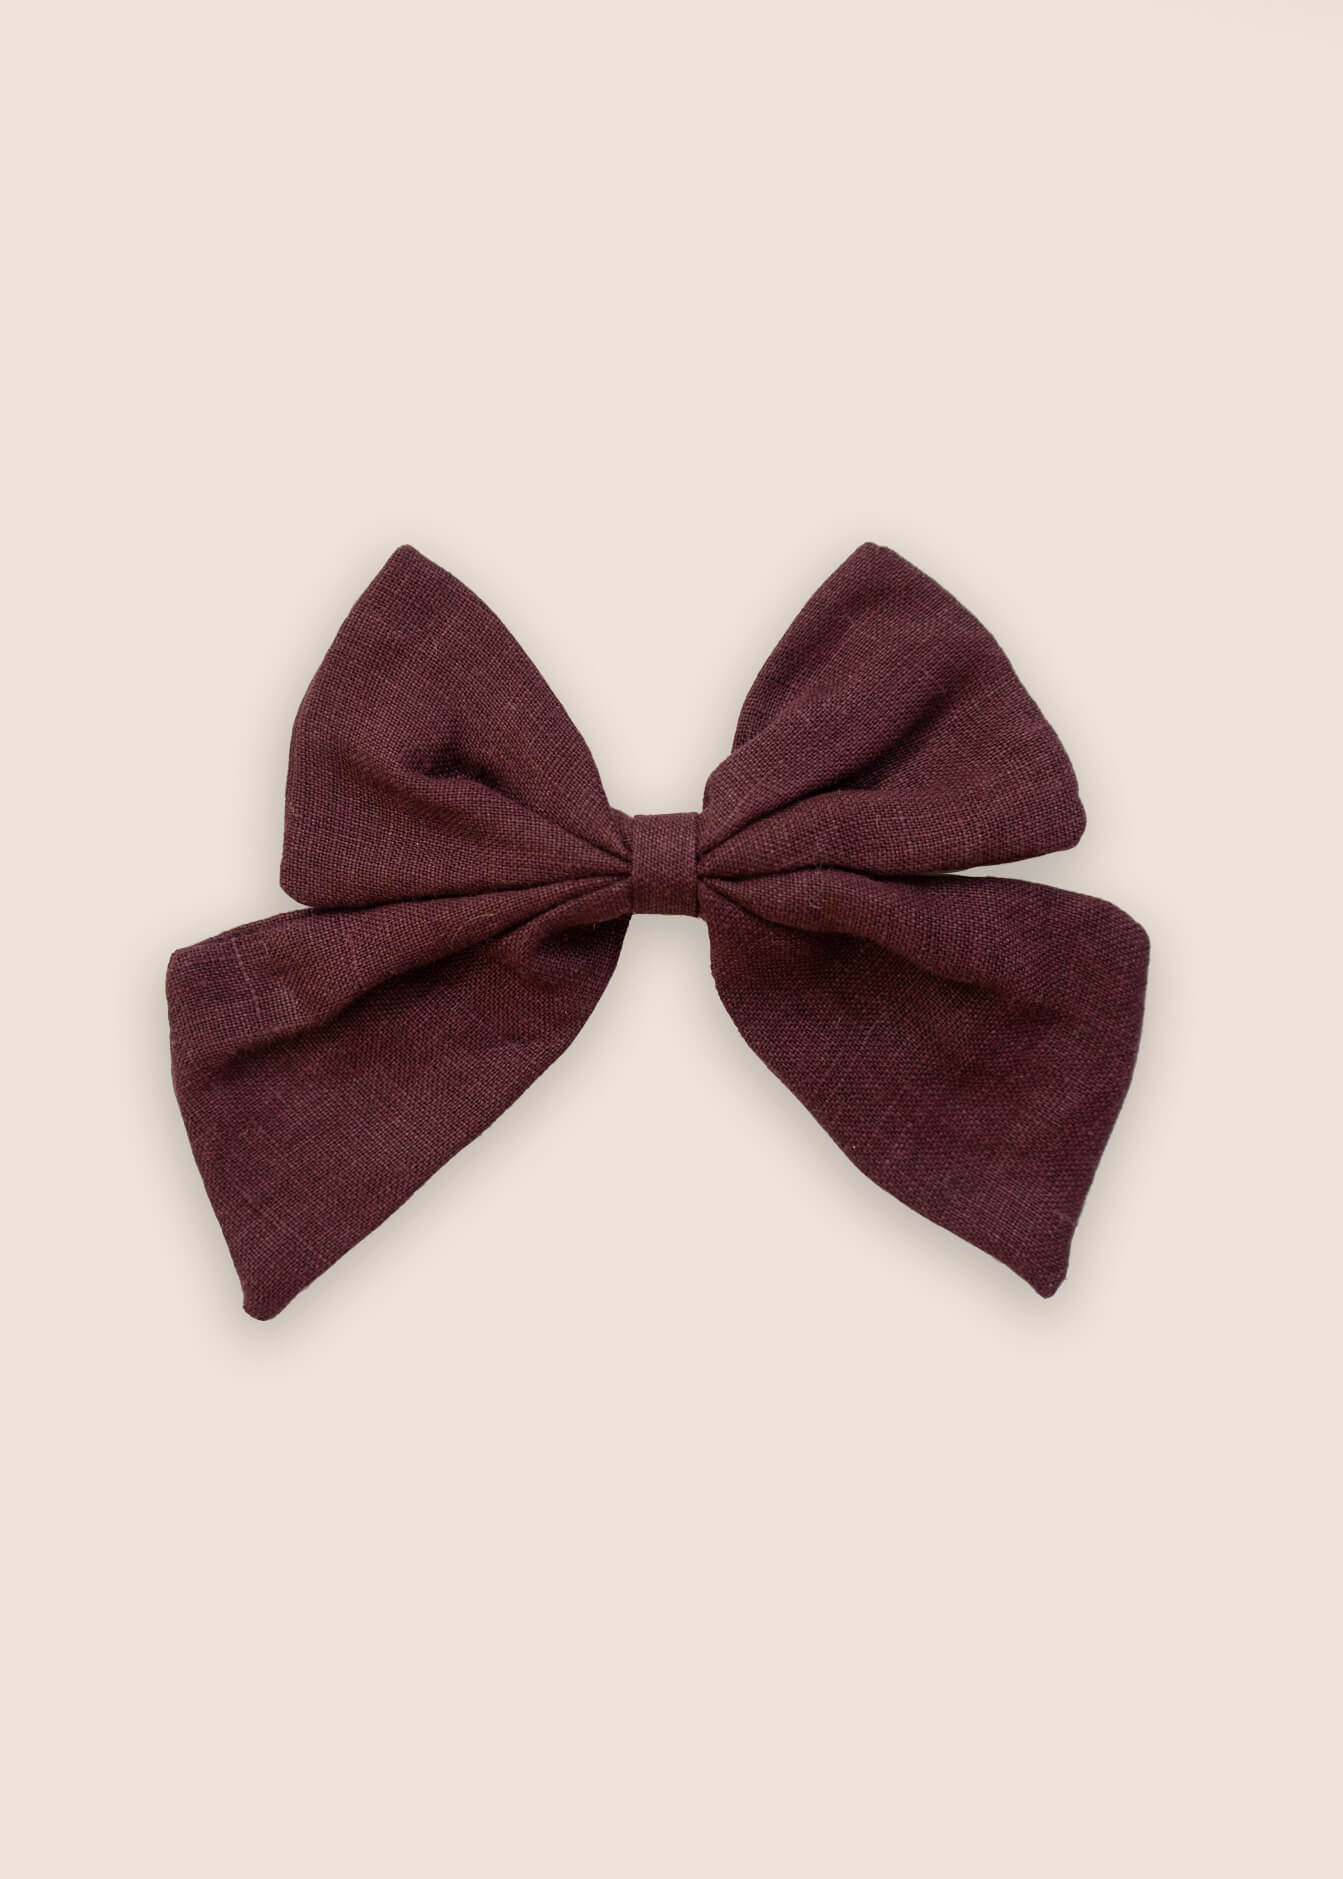 BELLE Bow Hair Clip - Red Wine - Rocco & The Fox